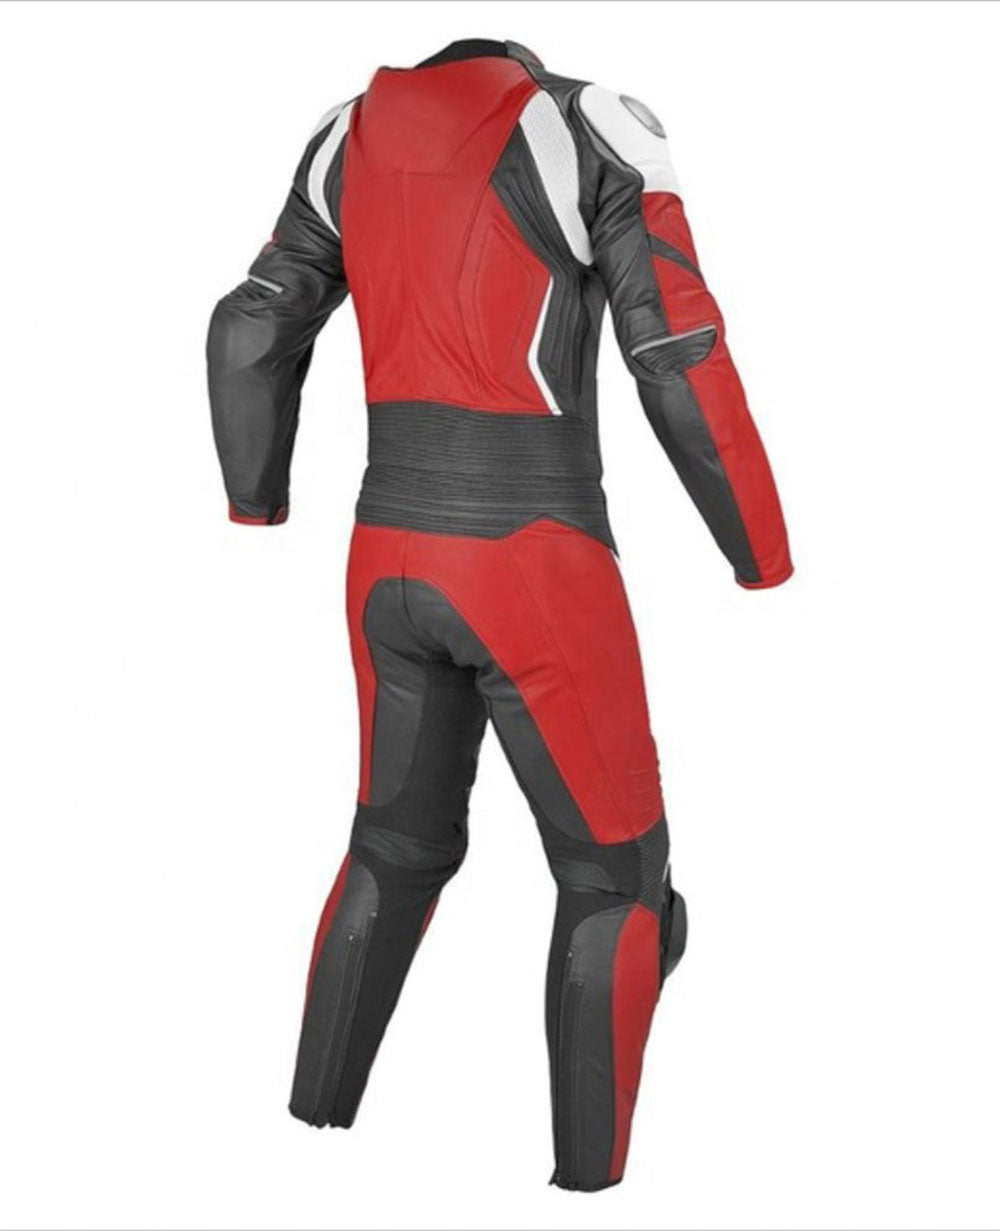 UG-0110 CUSTOMIZED DESIGN MOTORCYCLE LEATHER RACING CE PROTECTED 2 PIECE SUIT BACK